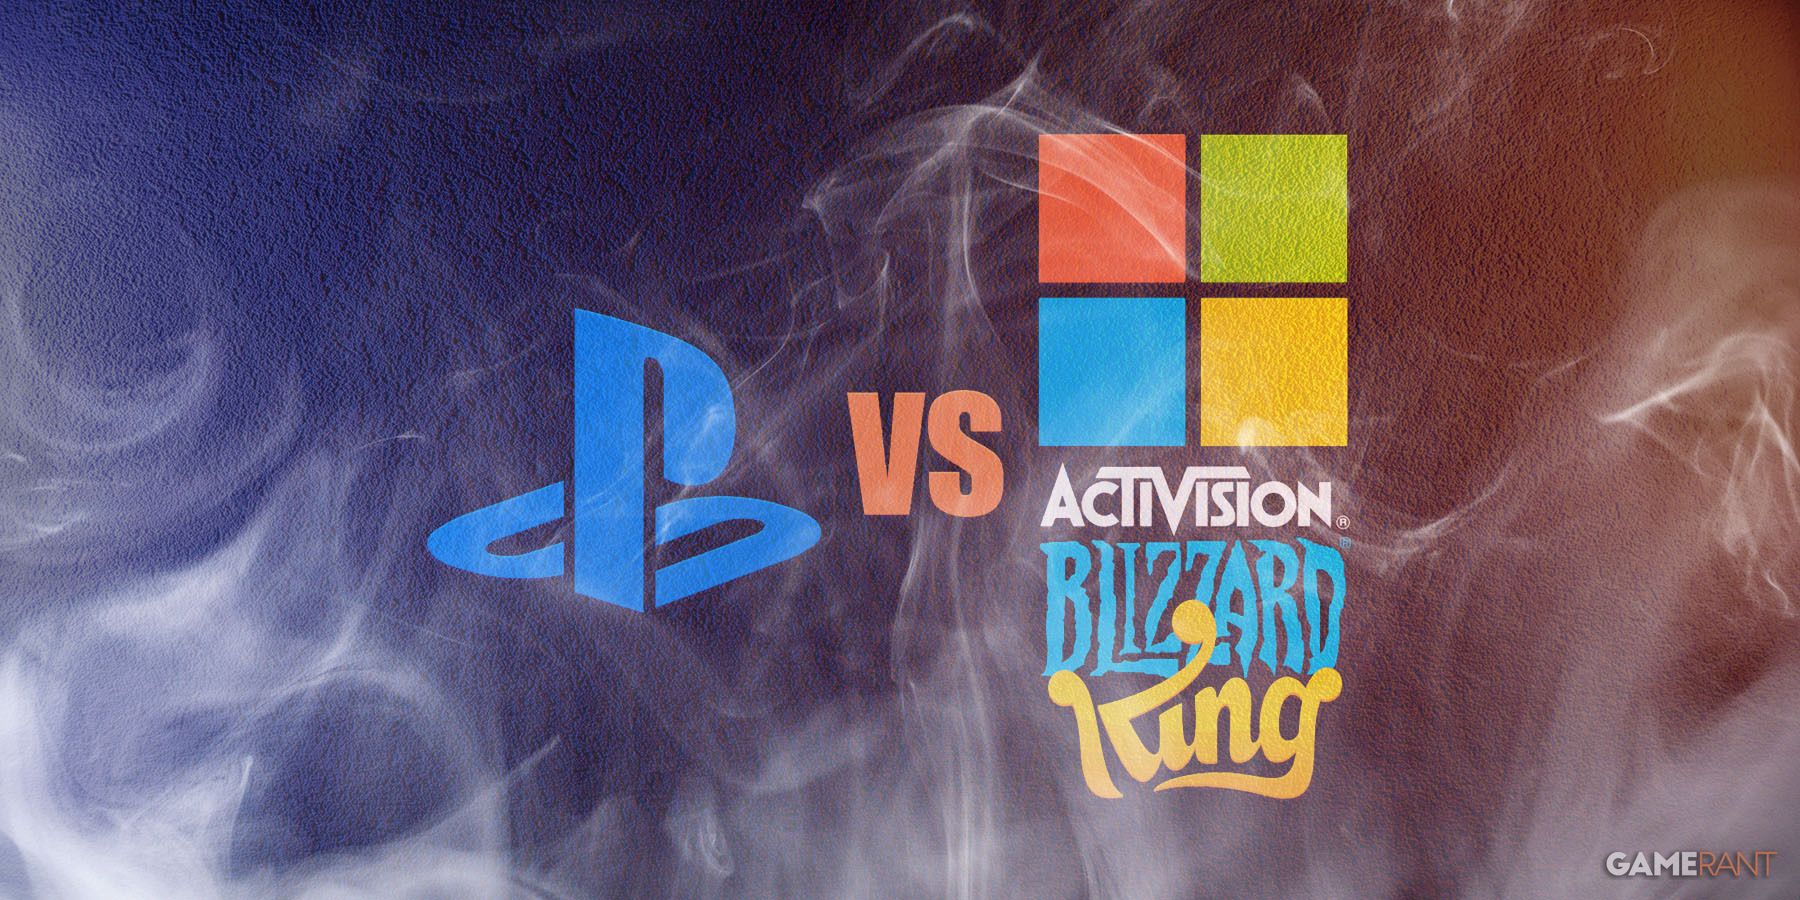 Sony ‘Lost Control’ in Opposing Microsoft’s Activision Blizzard Deal, Attorney Says